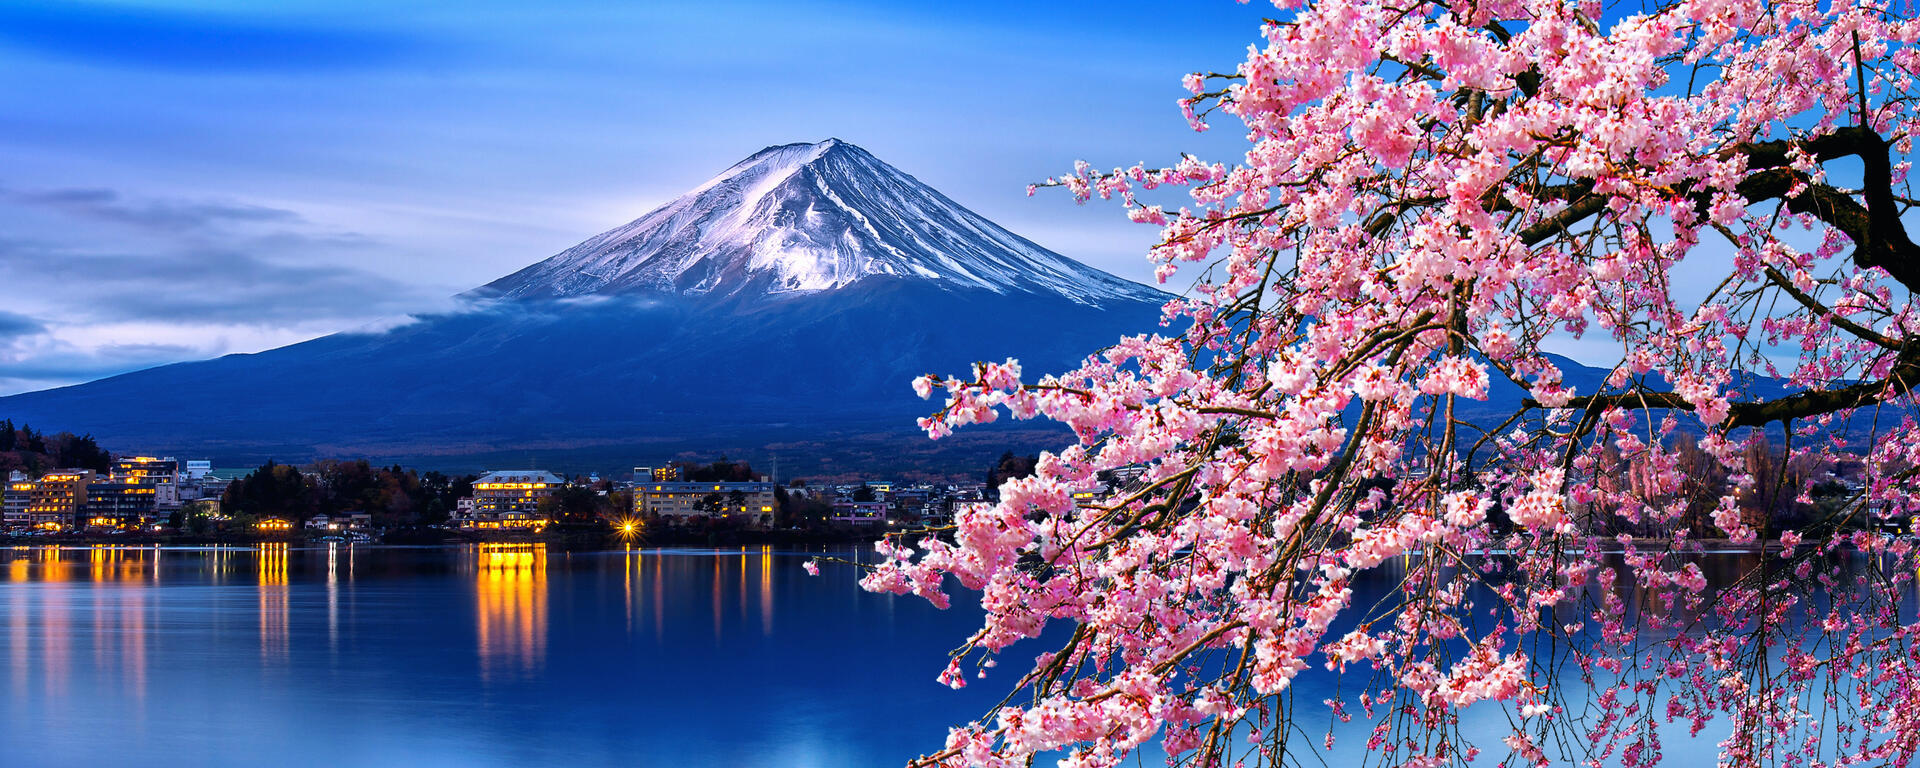 Fuji mountain and cherry blossoms in spring, Japan. - stock photo